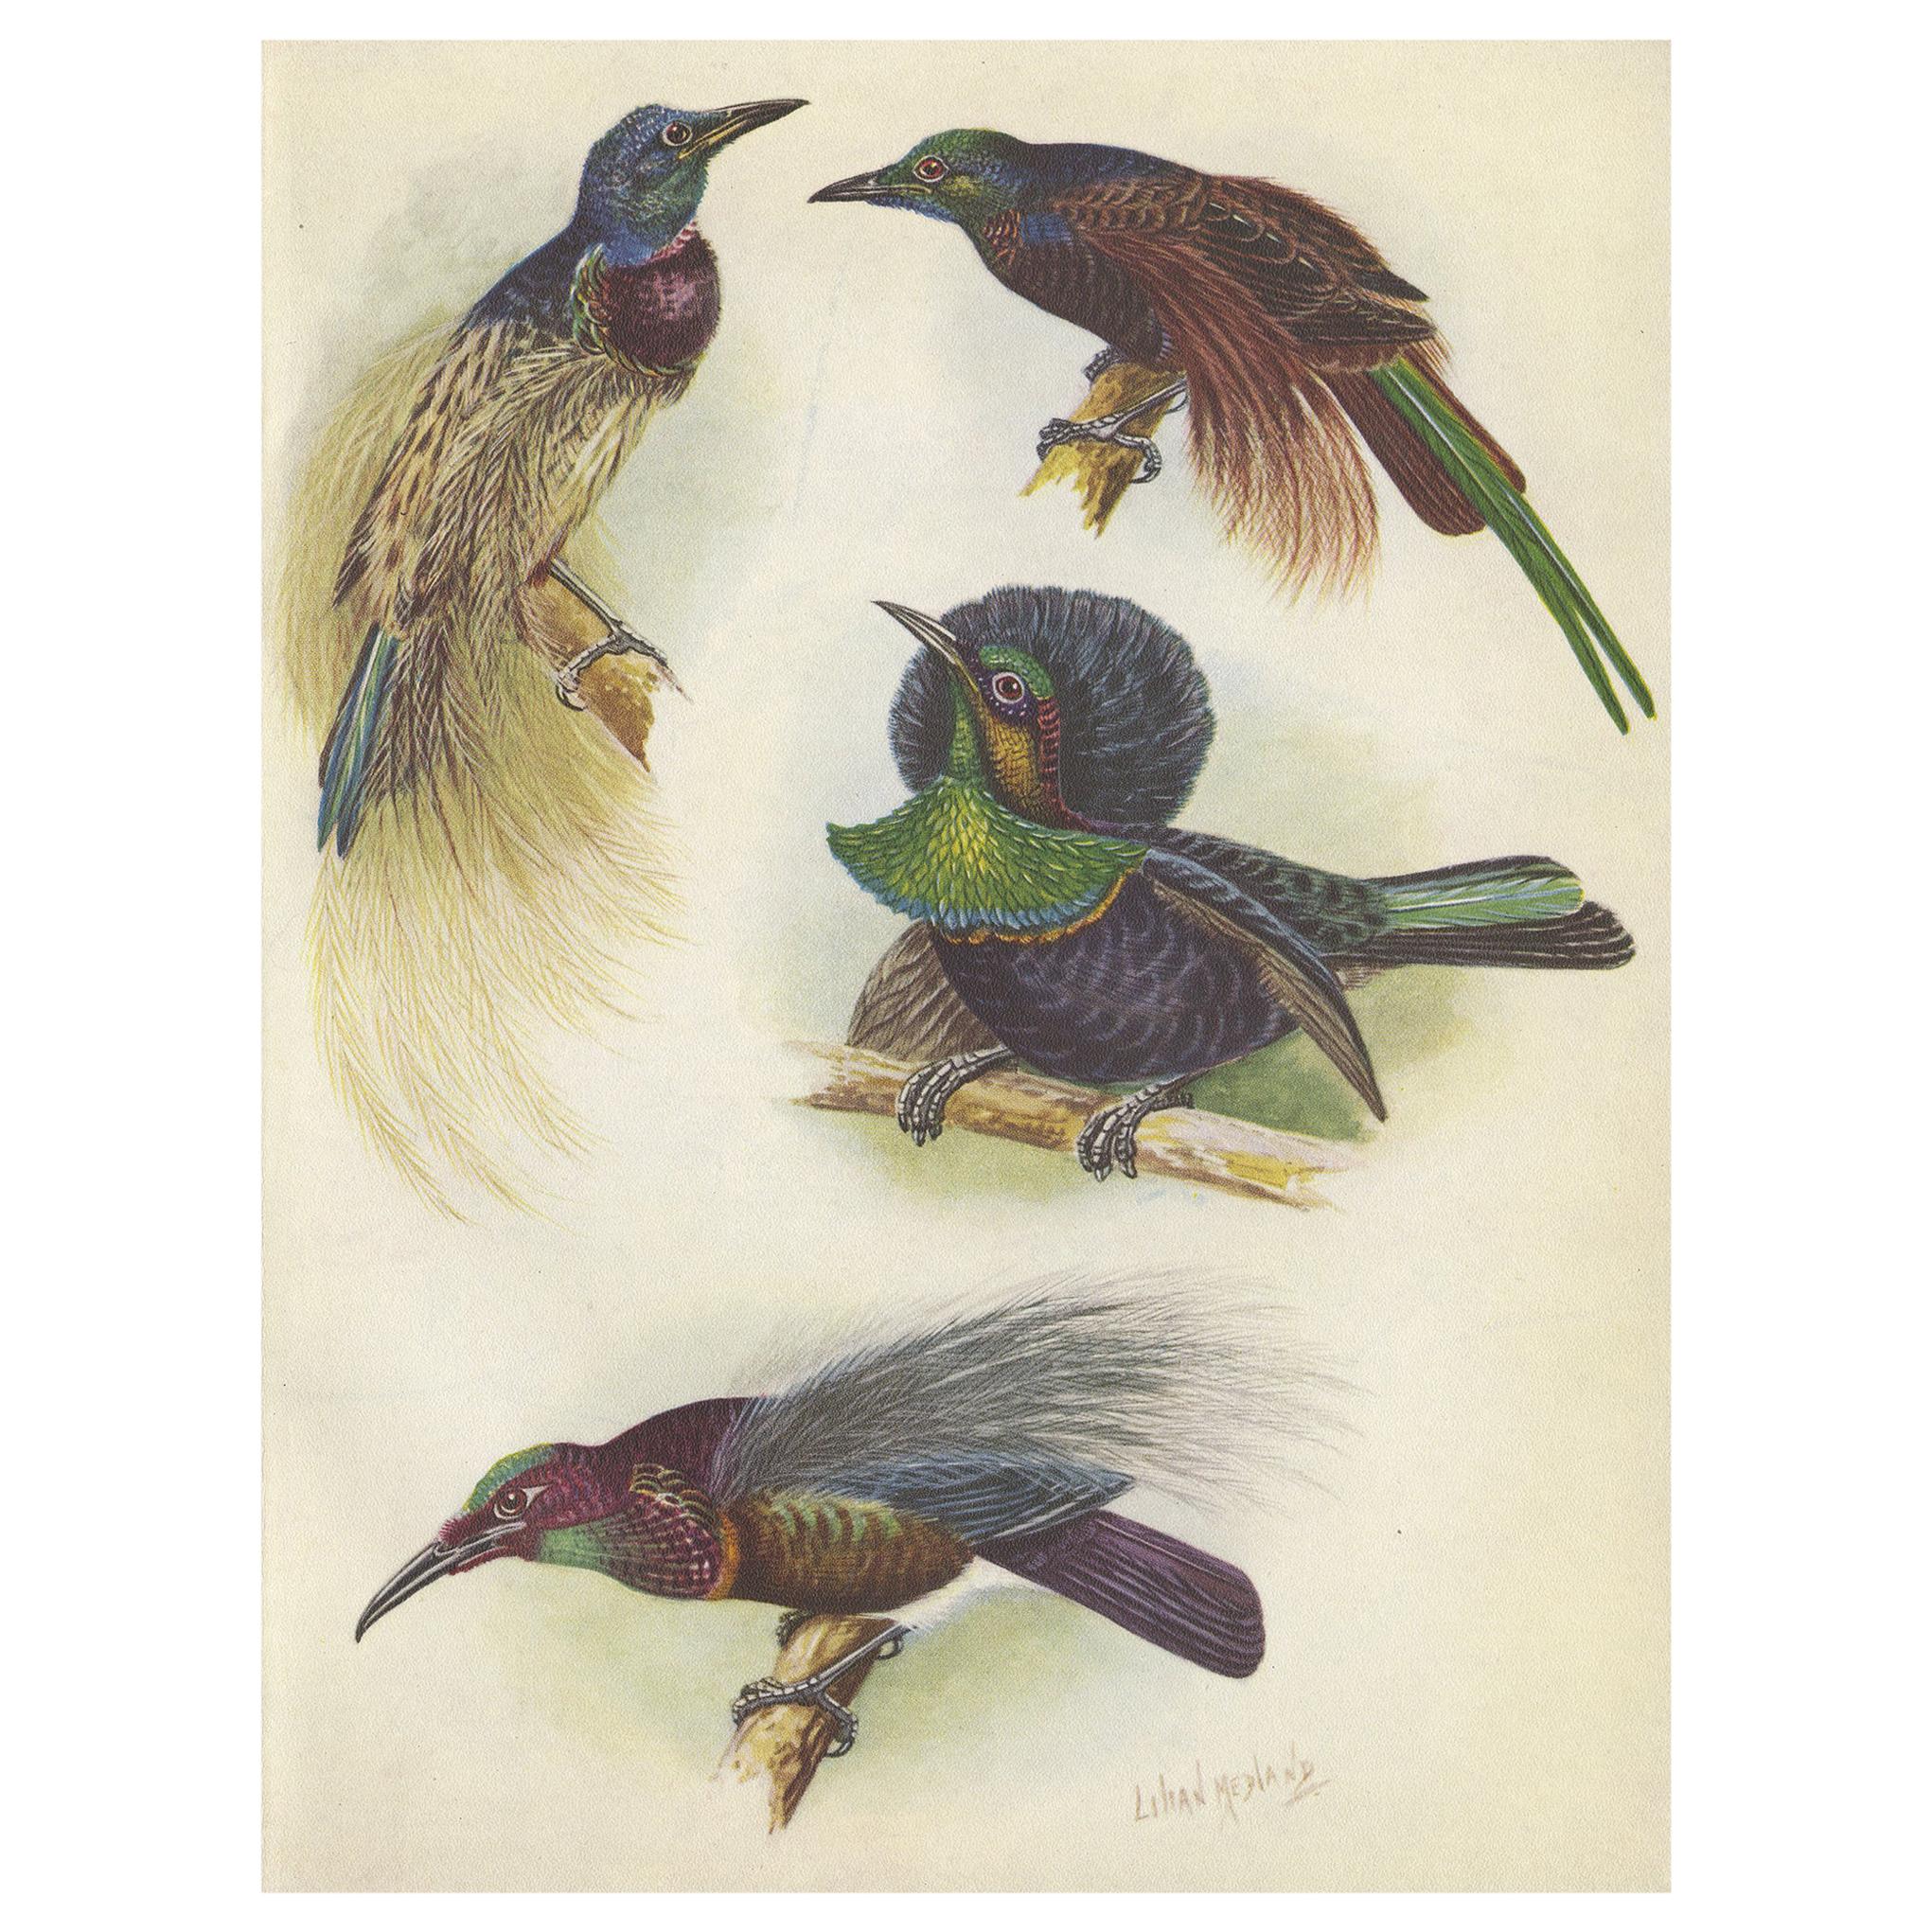 Antique Print of the Bensbach's Rifle Bird and Others, 1950